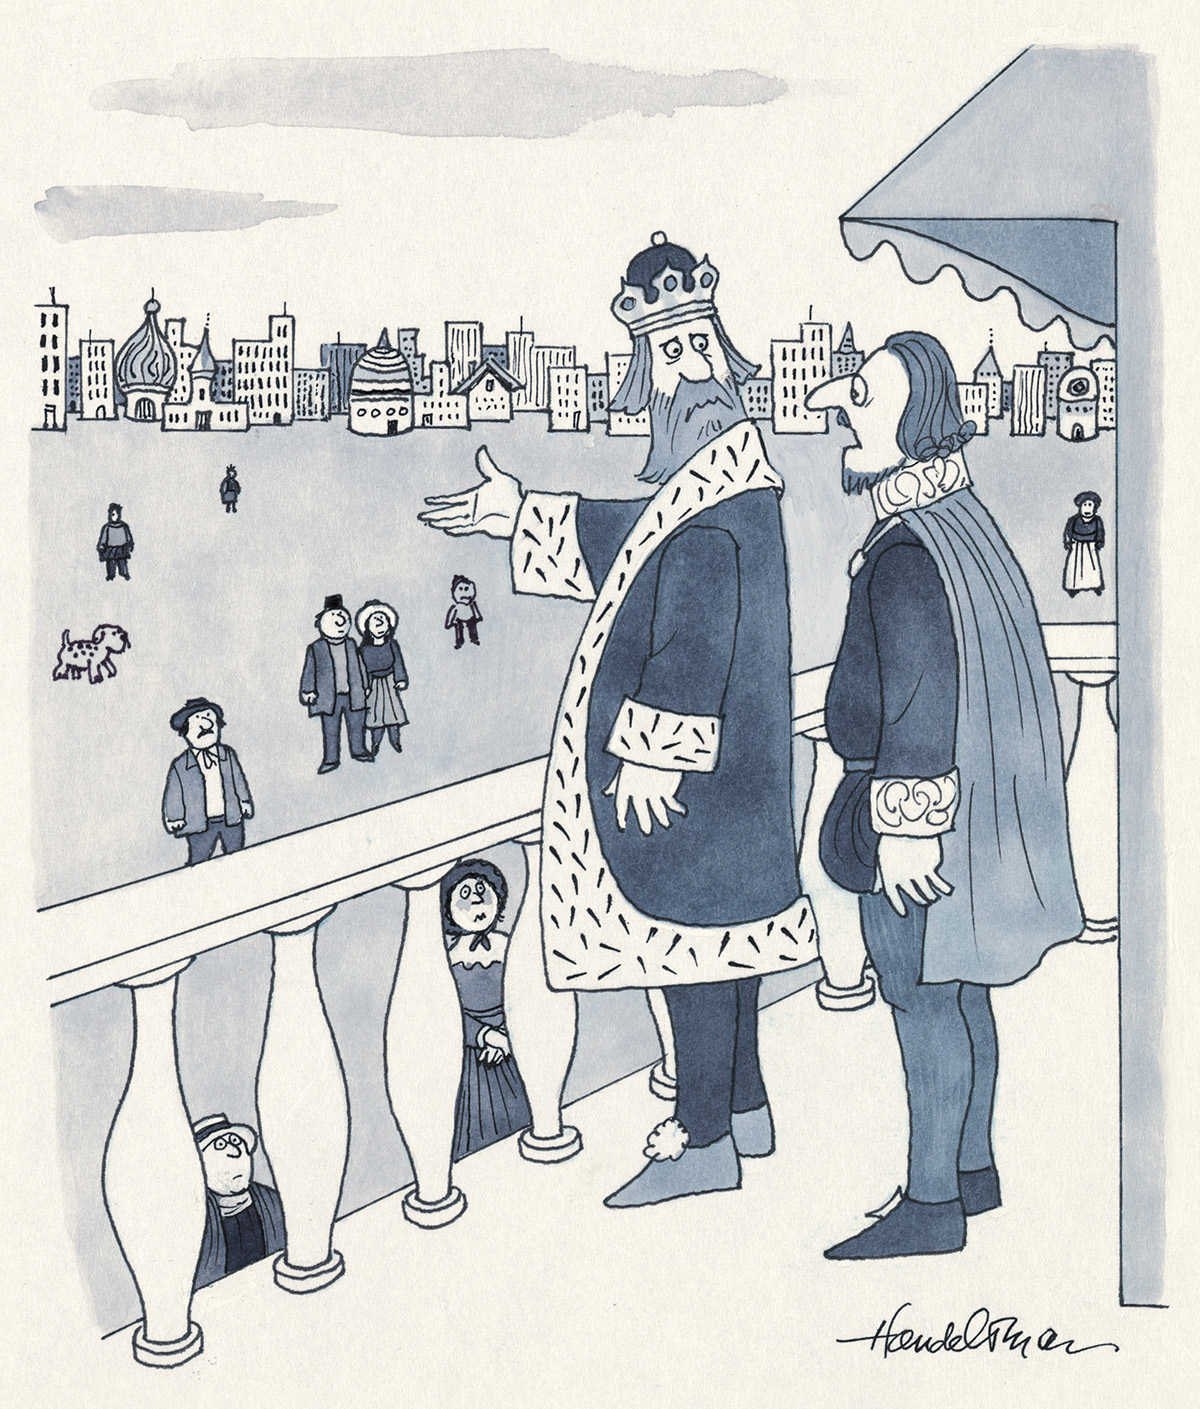 THE NEW YORKER. J.B. (BUD) HANDELSMAN. Its as big a turnout we could manage, Sire. Theres so much cynicism these days.